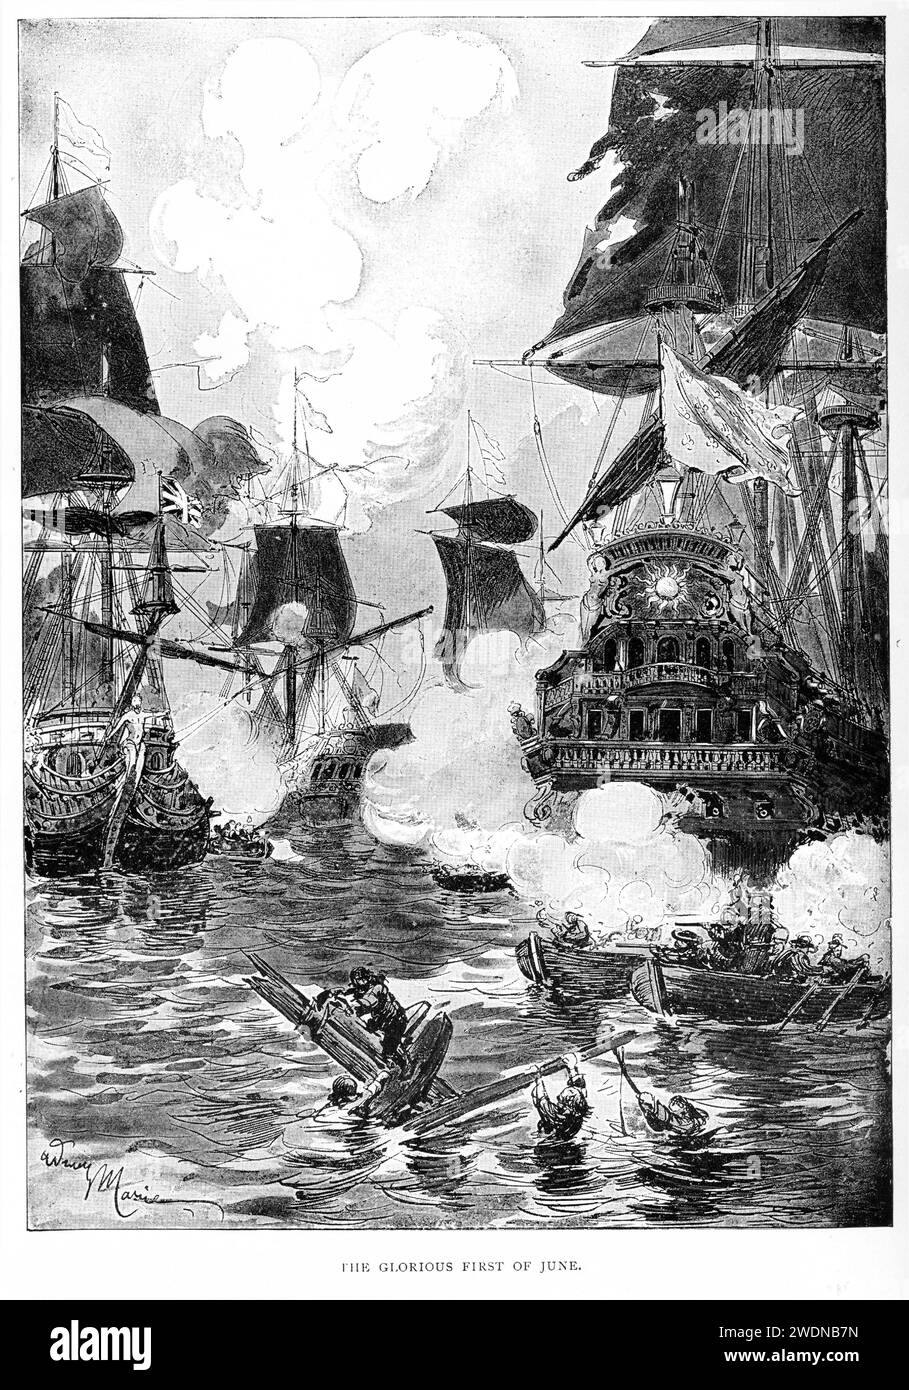 The Glorious First of June (1 June 1794), also known as the Fourth Battle of Ushant, (known in France as the Bataille du 13 prairial an 2 or Combat de Prairial) was the first and largest fleet action of the naval conflict between the Kingdom of Great Britain and the First French Republic during the French Revolutionary Wars. Stock Photo